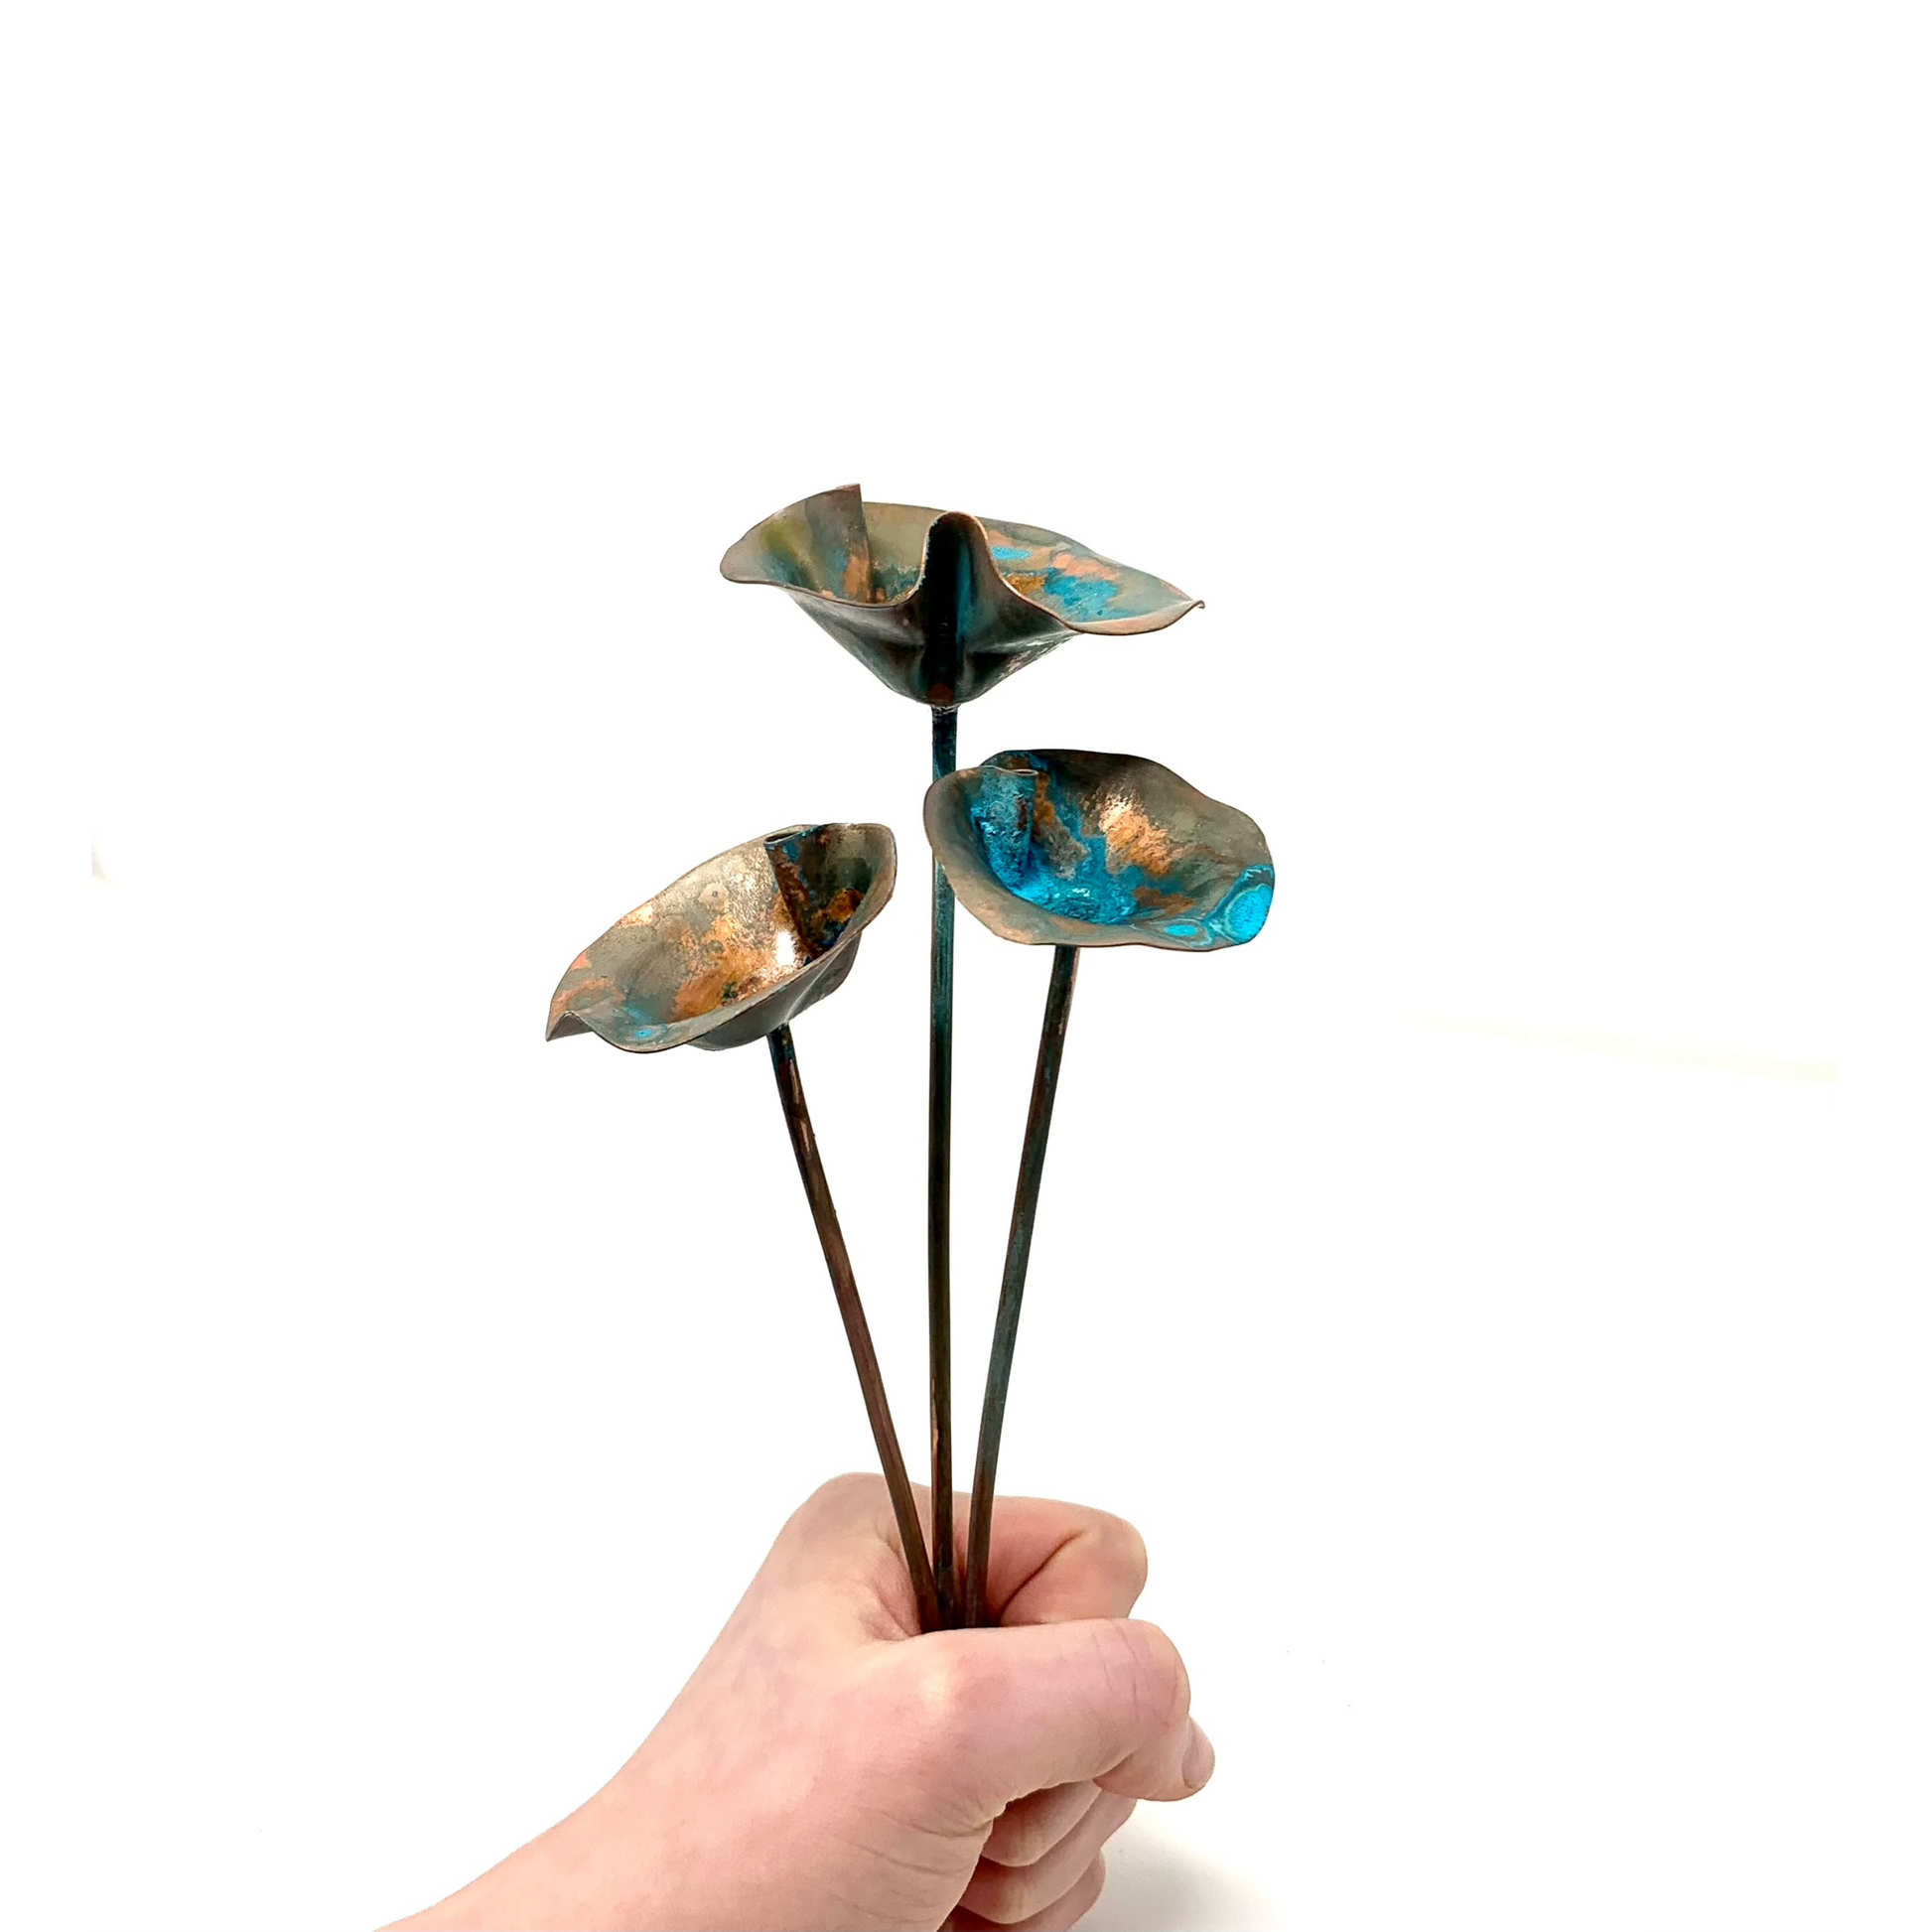 Child's hand holding a bouquet of copper patina flowers